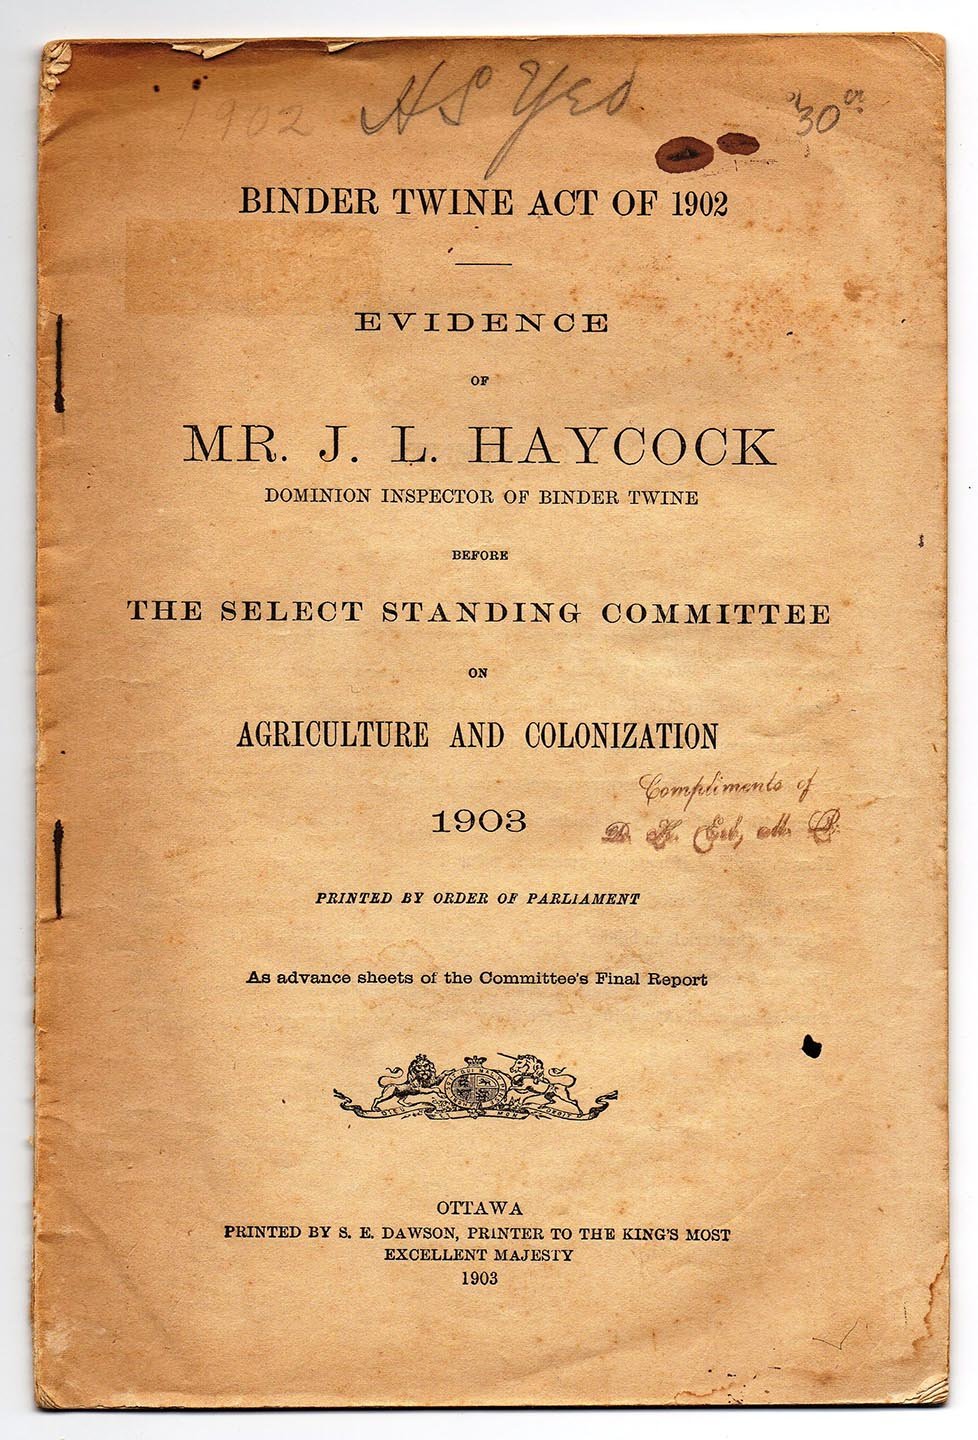 Binder Twine Act of 1902: Evidence of Mr. J. L. Haycock, Dominion Inspector of Binder Twine, Before the Select Standing Committee on Agriculture and Colonization 1903